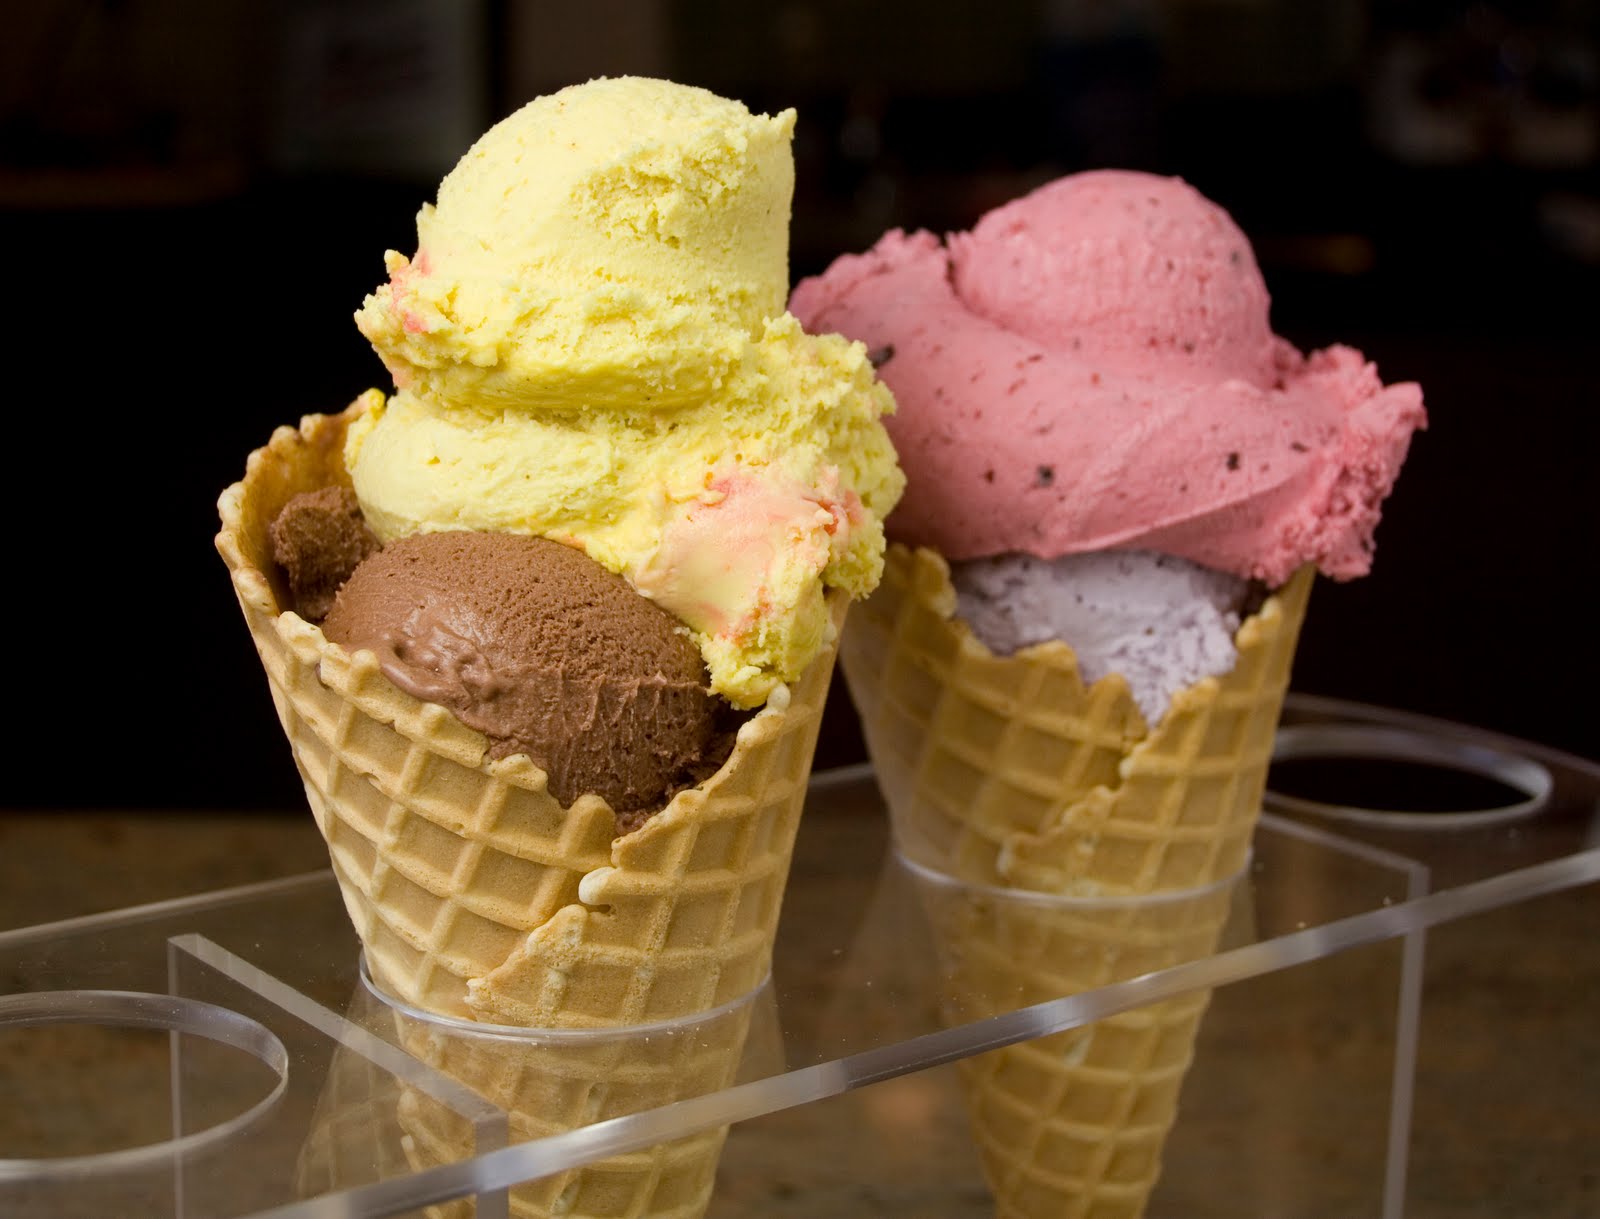 Wondering what gelato is made of? It's the Italian cousin of ice cream!